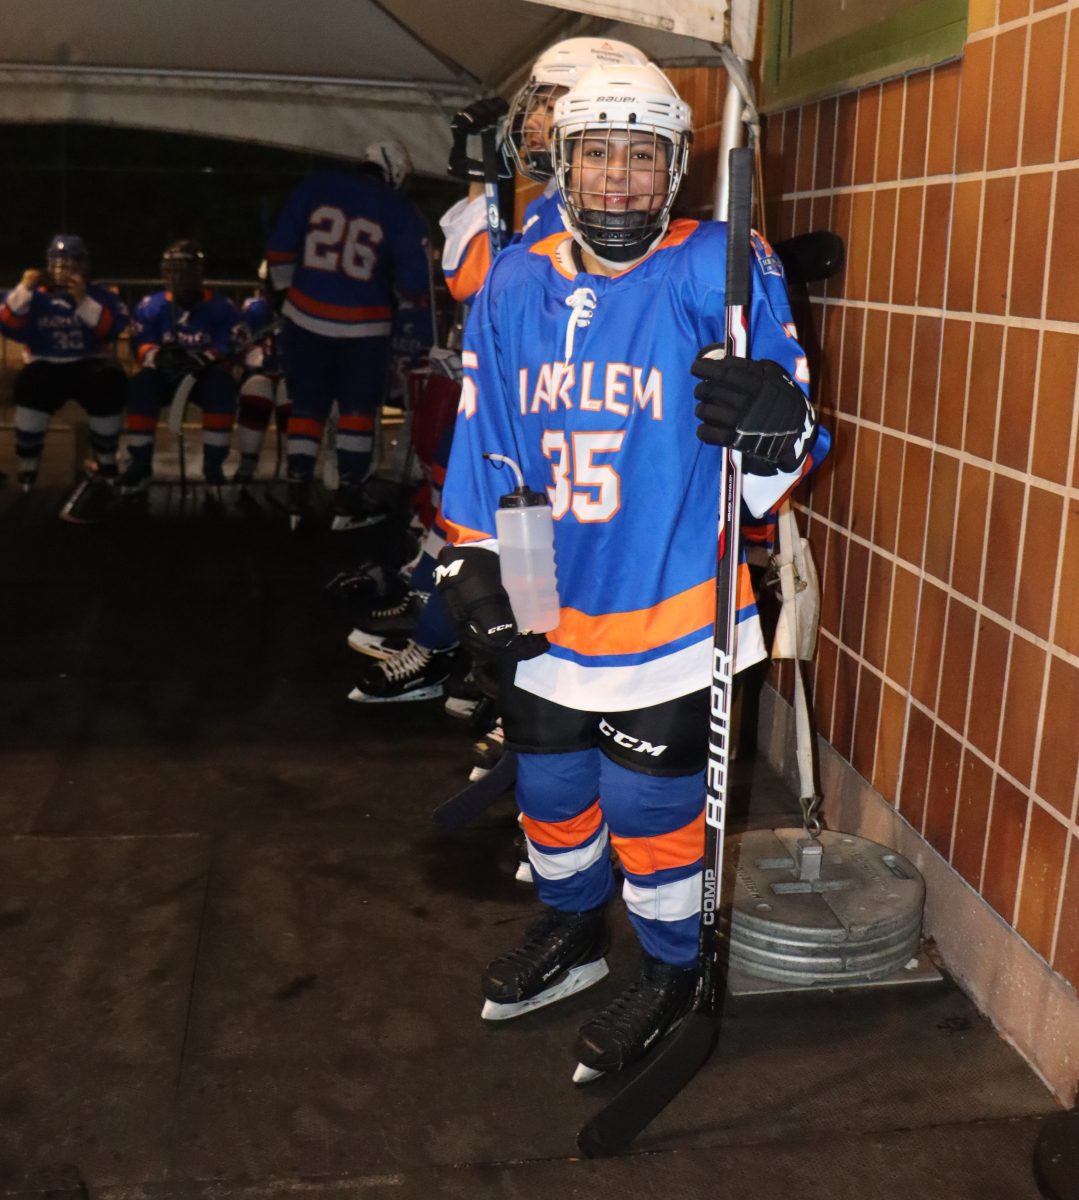 Martinez prepares to take the ice at the 16th Annual Lightning Tournament at Riverbank State Park on Mar. 6.